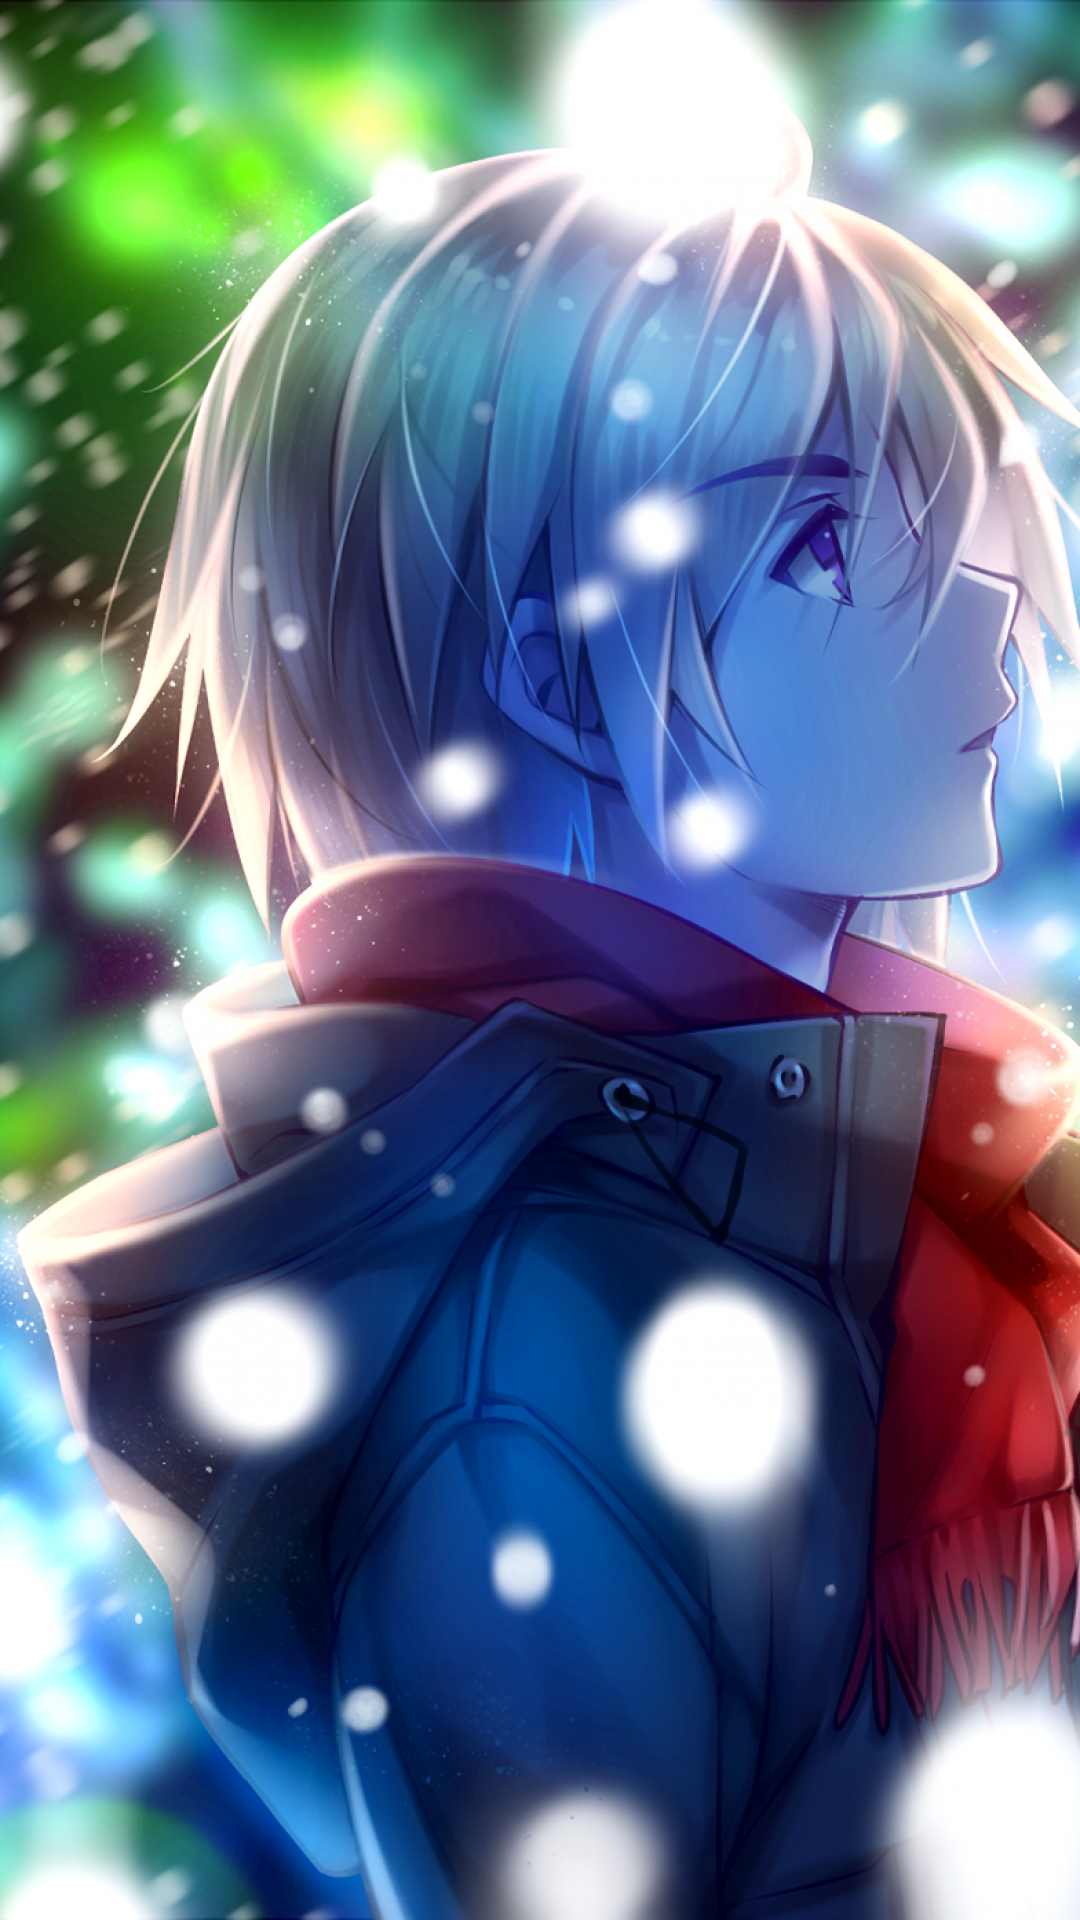 Download 1080x1920 Anime Boy, Profile View, Red Scarf, Winter, Snow, Coffee Wallpaper for iPhone iPhone 7 Plus, iPhone 6+, Sony Xperia Z, HTC One